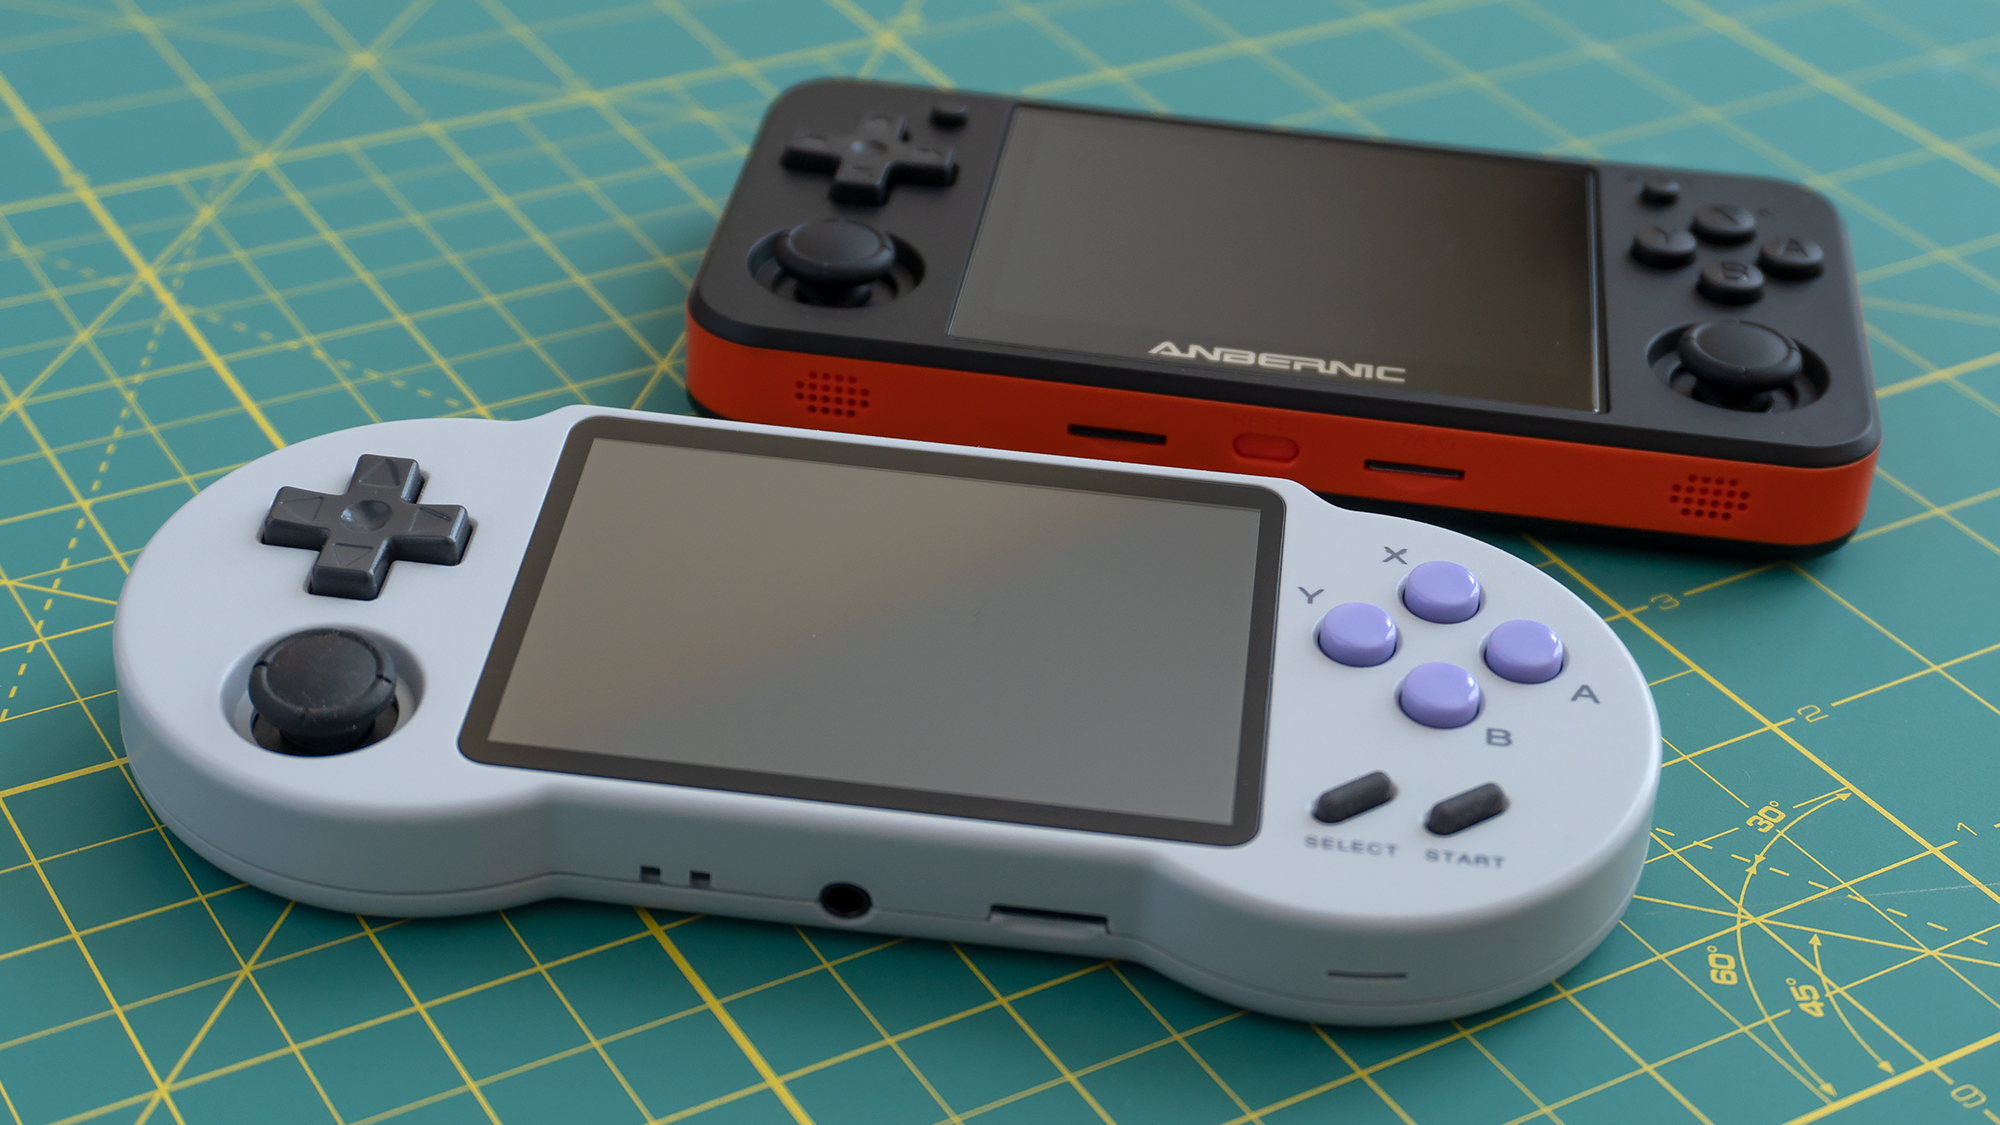 The Anbernic Retro Game 350P is still our top choice for overall best handheld emulator, but for ease of use and playability the PocketGo S30 is well priced at just $US60 ($79). (Photo: Andrew Liszewski/Gizmodo)